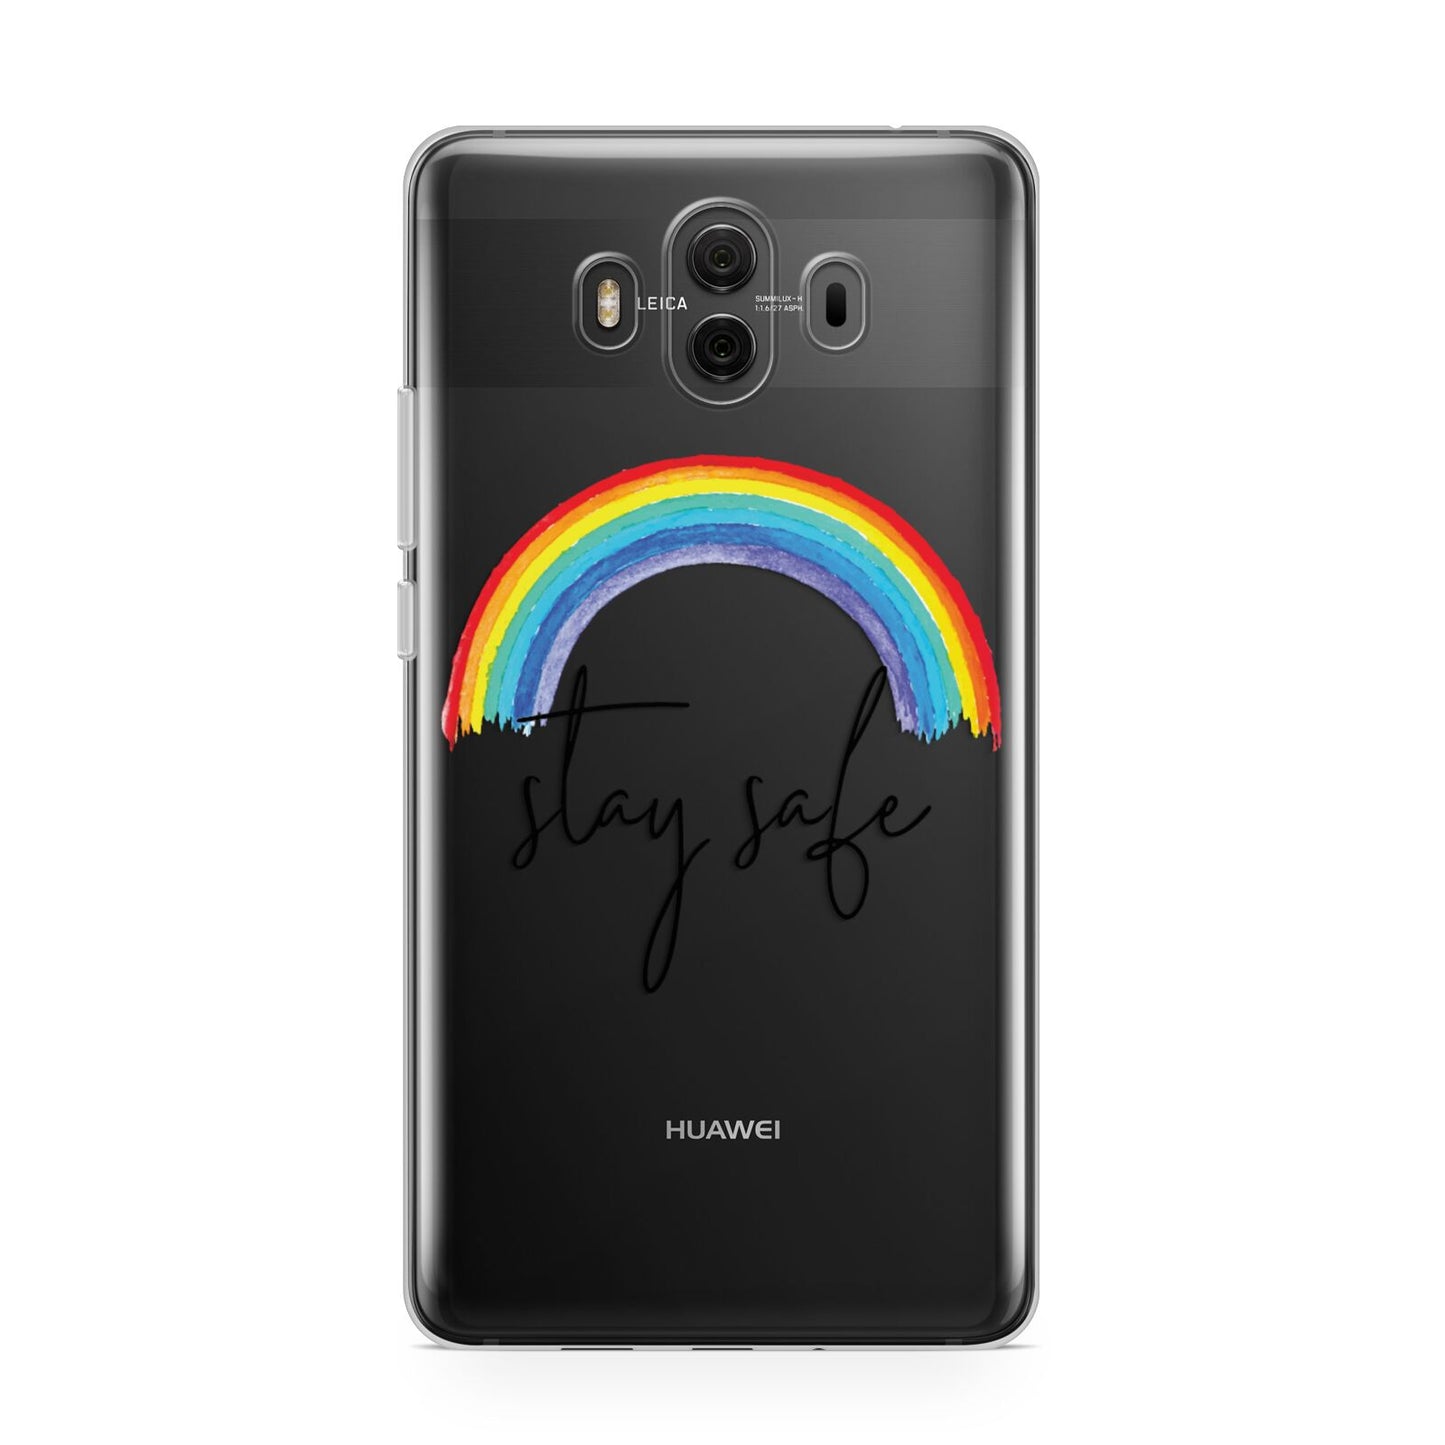 Stay Safe Rainbow Huawei Mate 10 Protective Phone Case